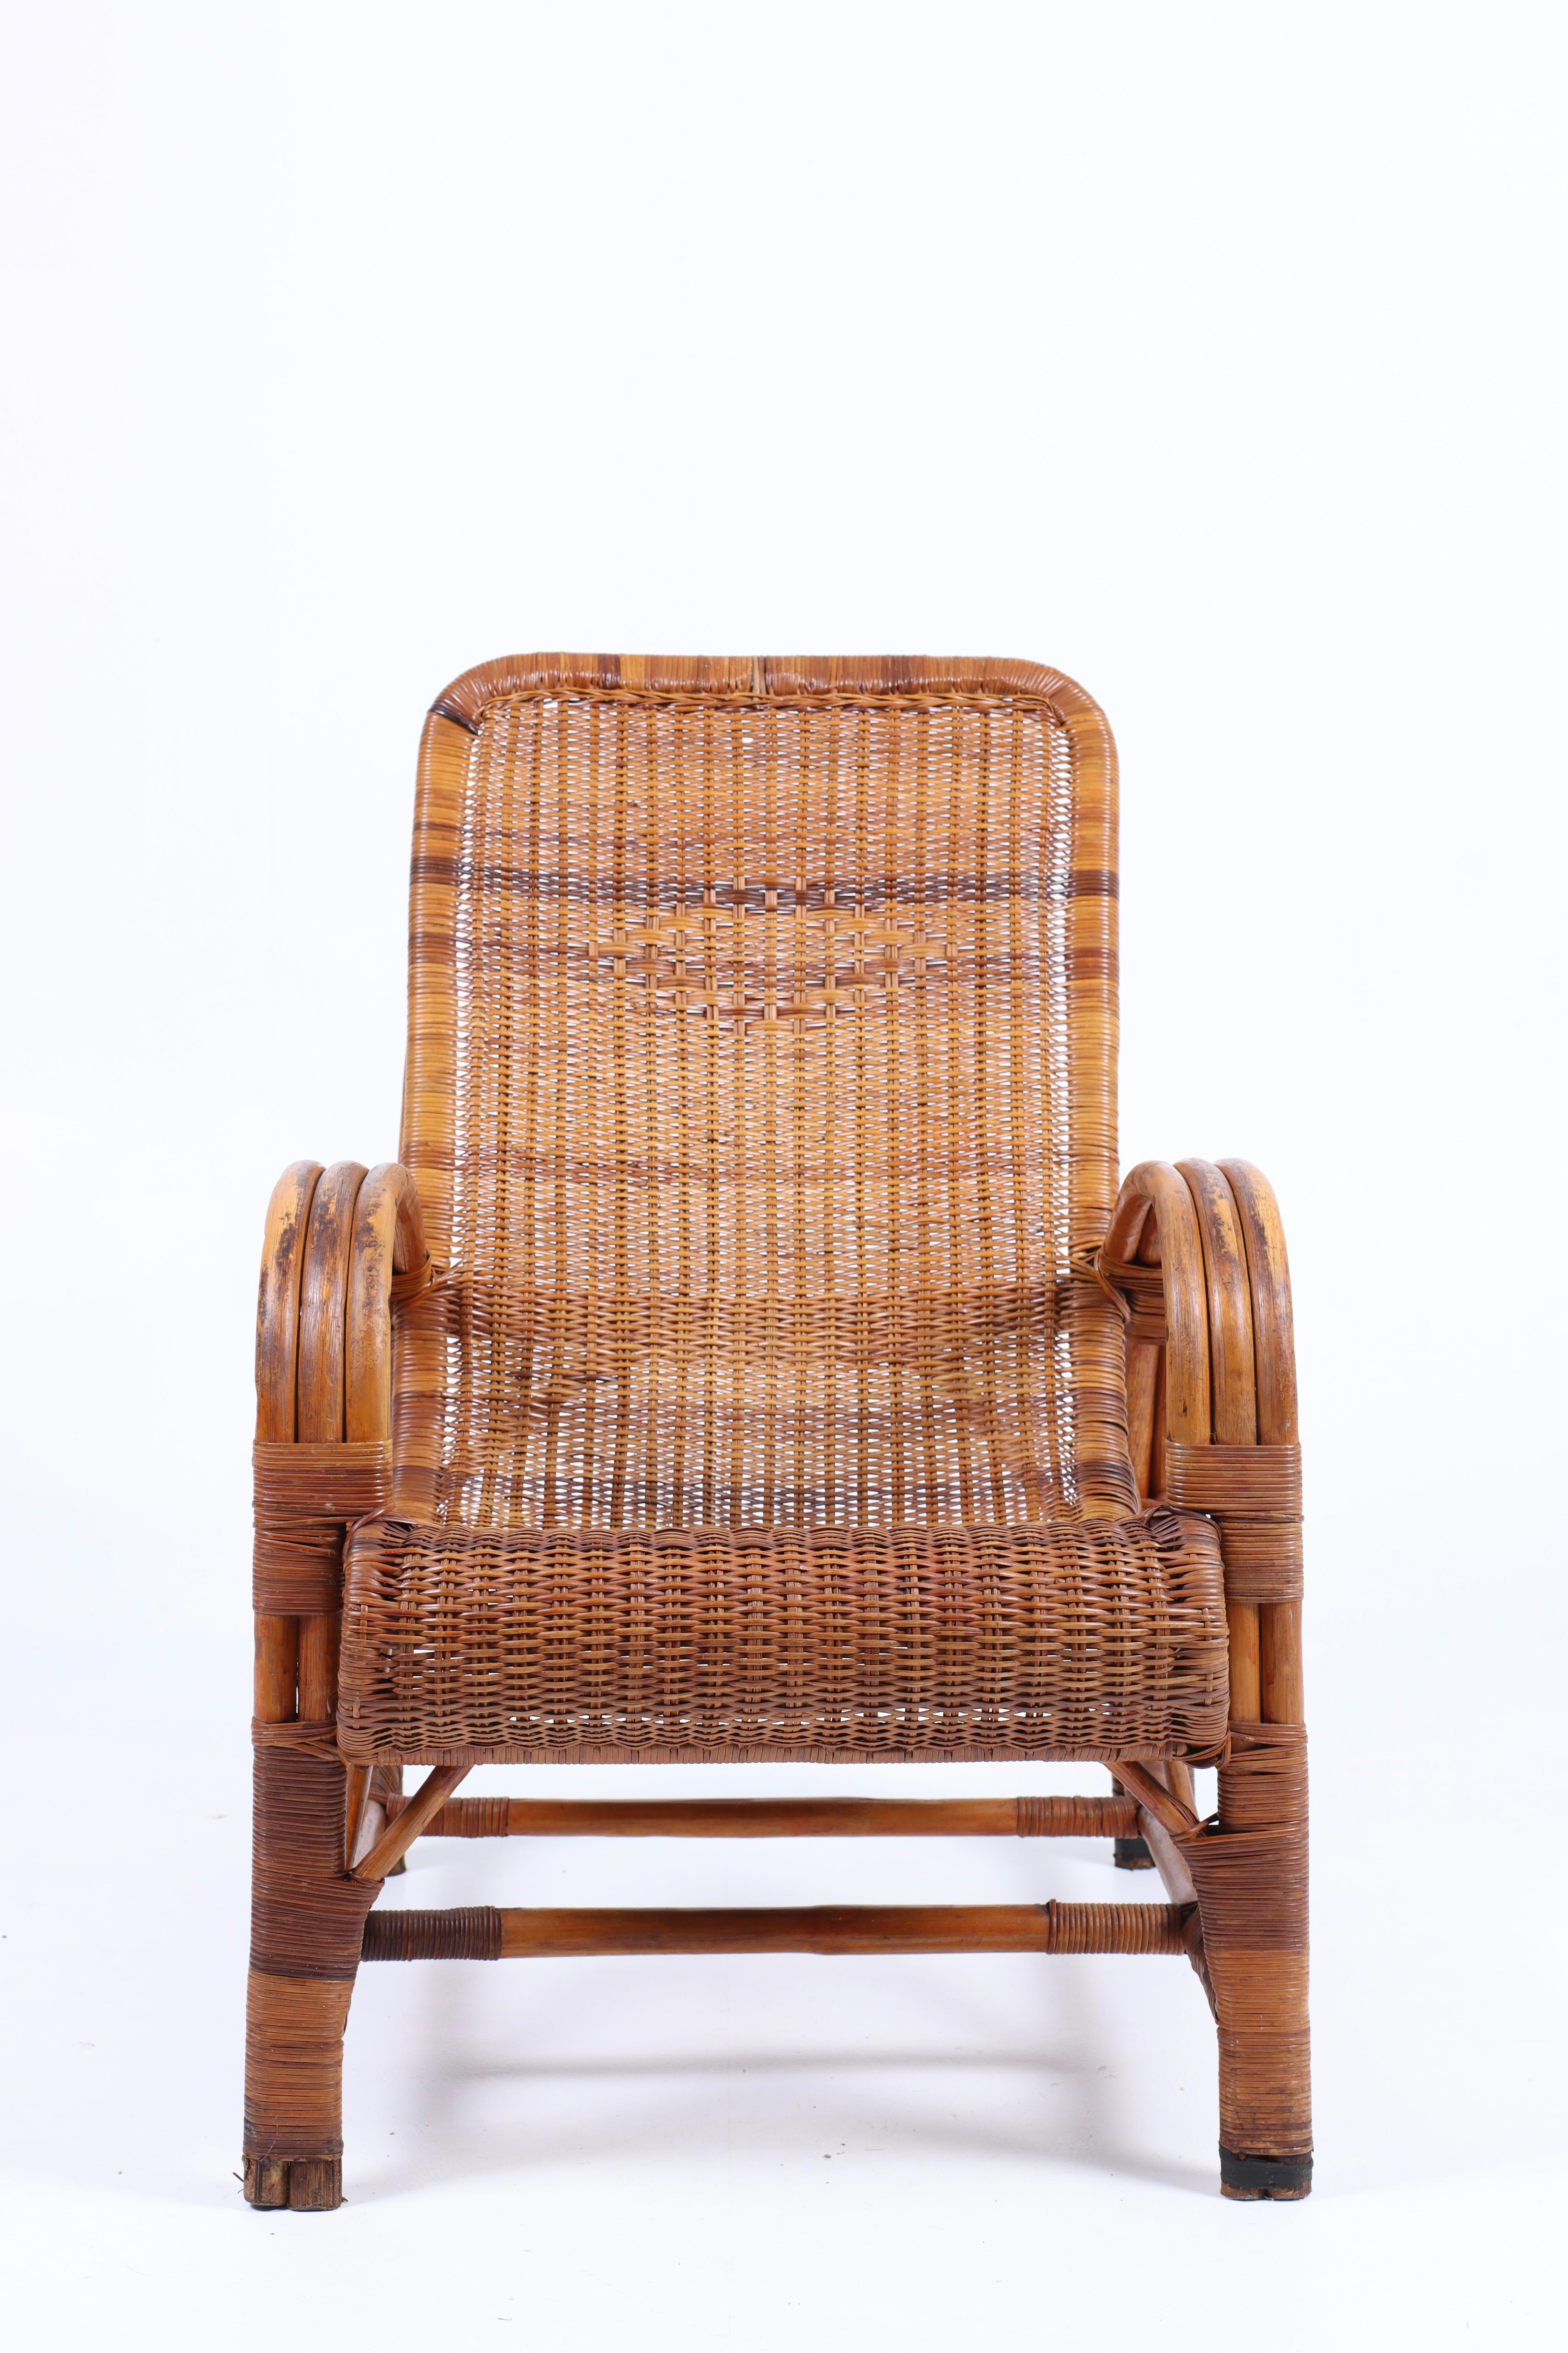 Scandinavian Modern Midcentury Lounge Chair in Bamboo, Made in Denmark, 1950s For Sale